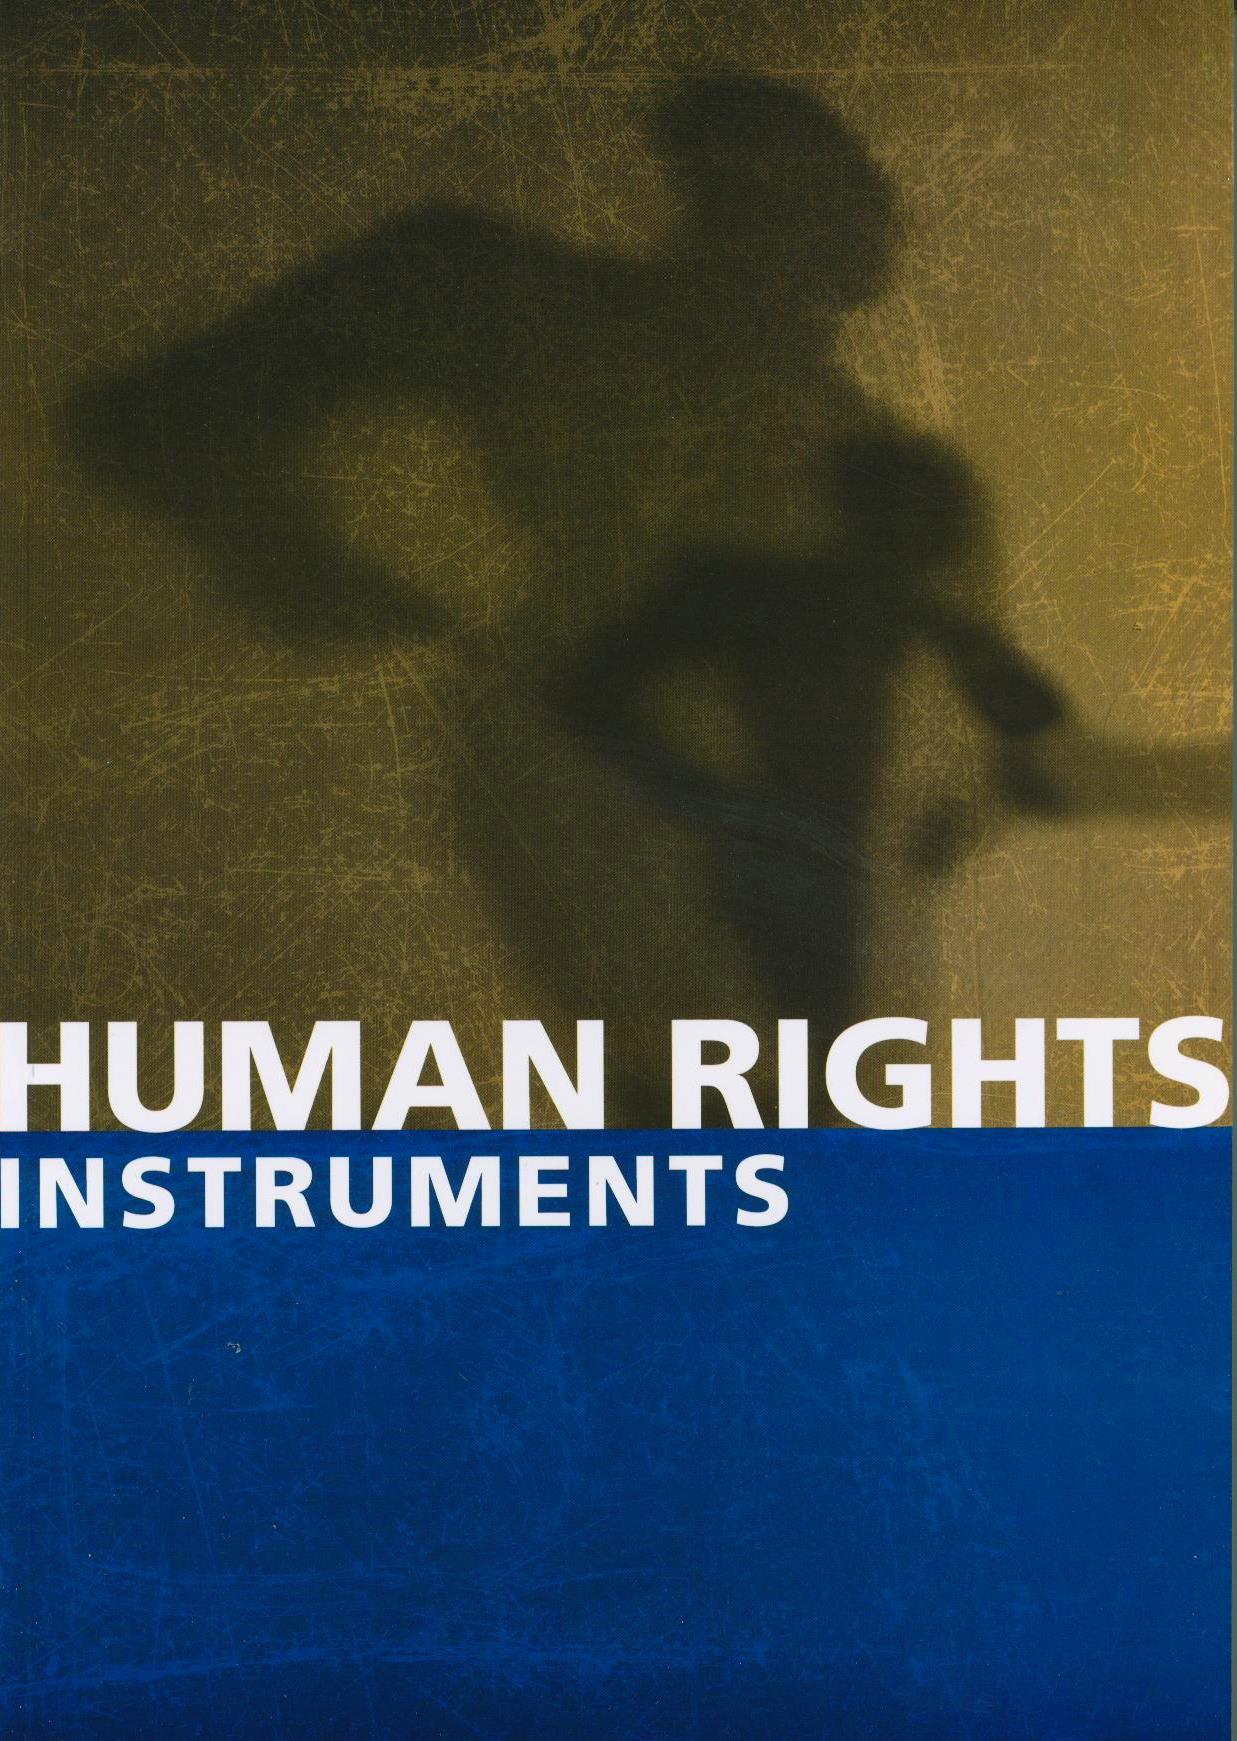 HRs-Instruments-cover